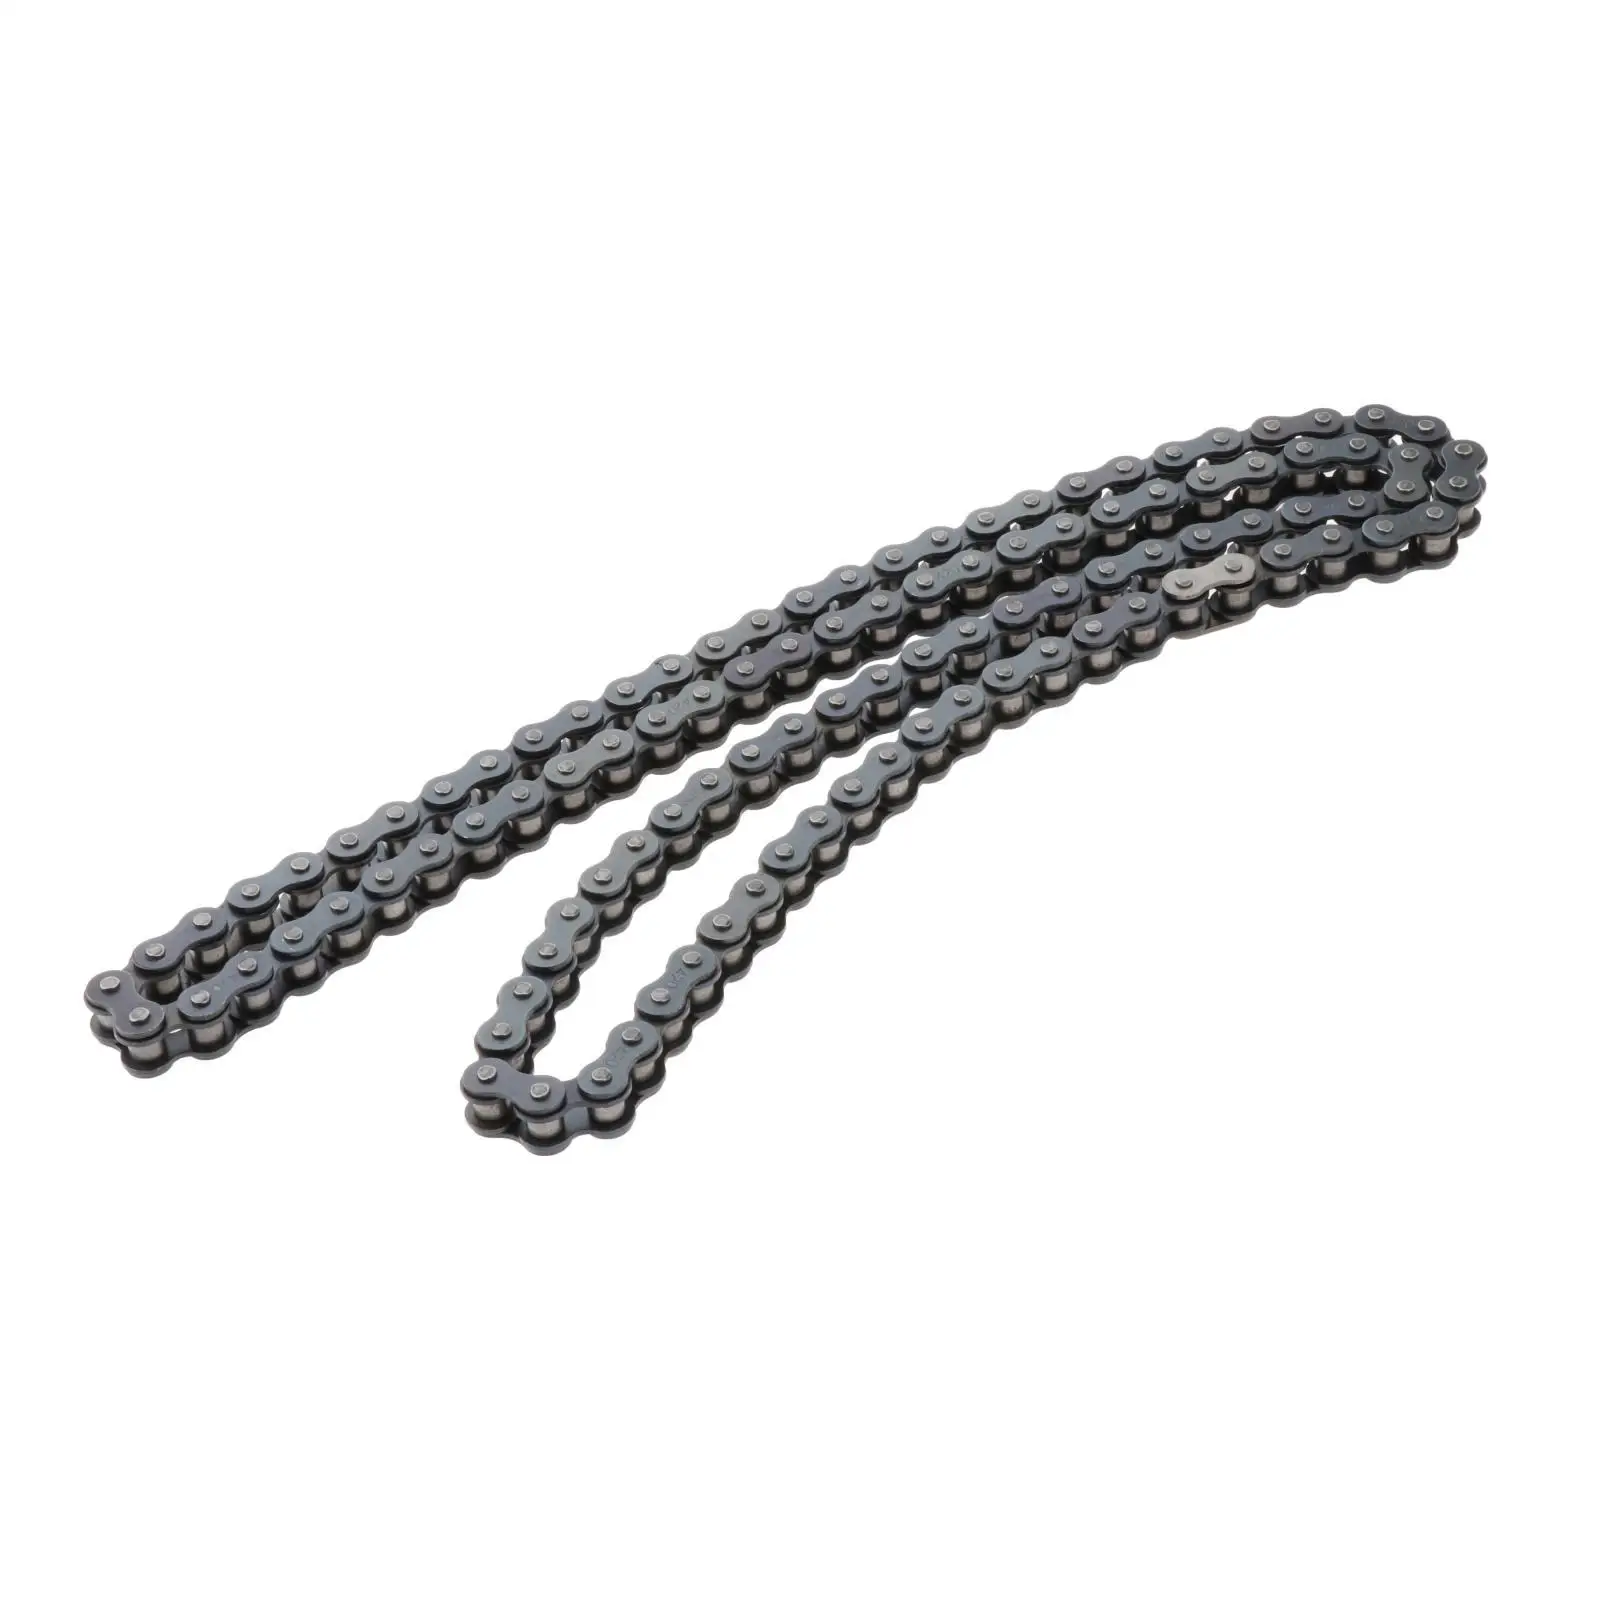 420 Motorcycle Chain 50-110Cc Accessory Drive Chain Chain Roller Motorcycle Chain for Mini Bike Off-Road Motorcycle Bike